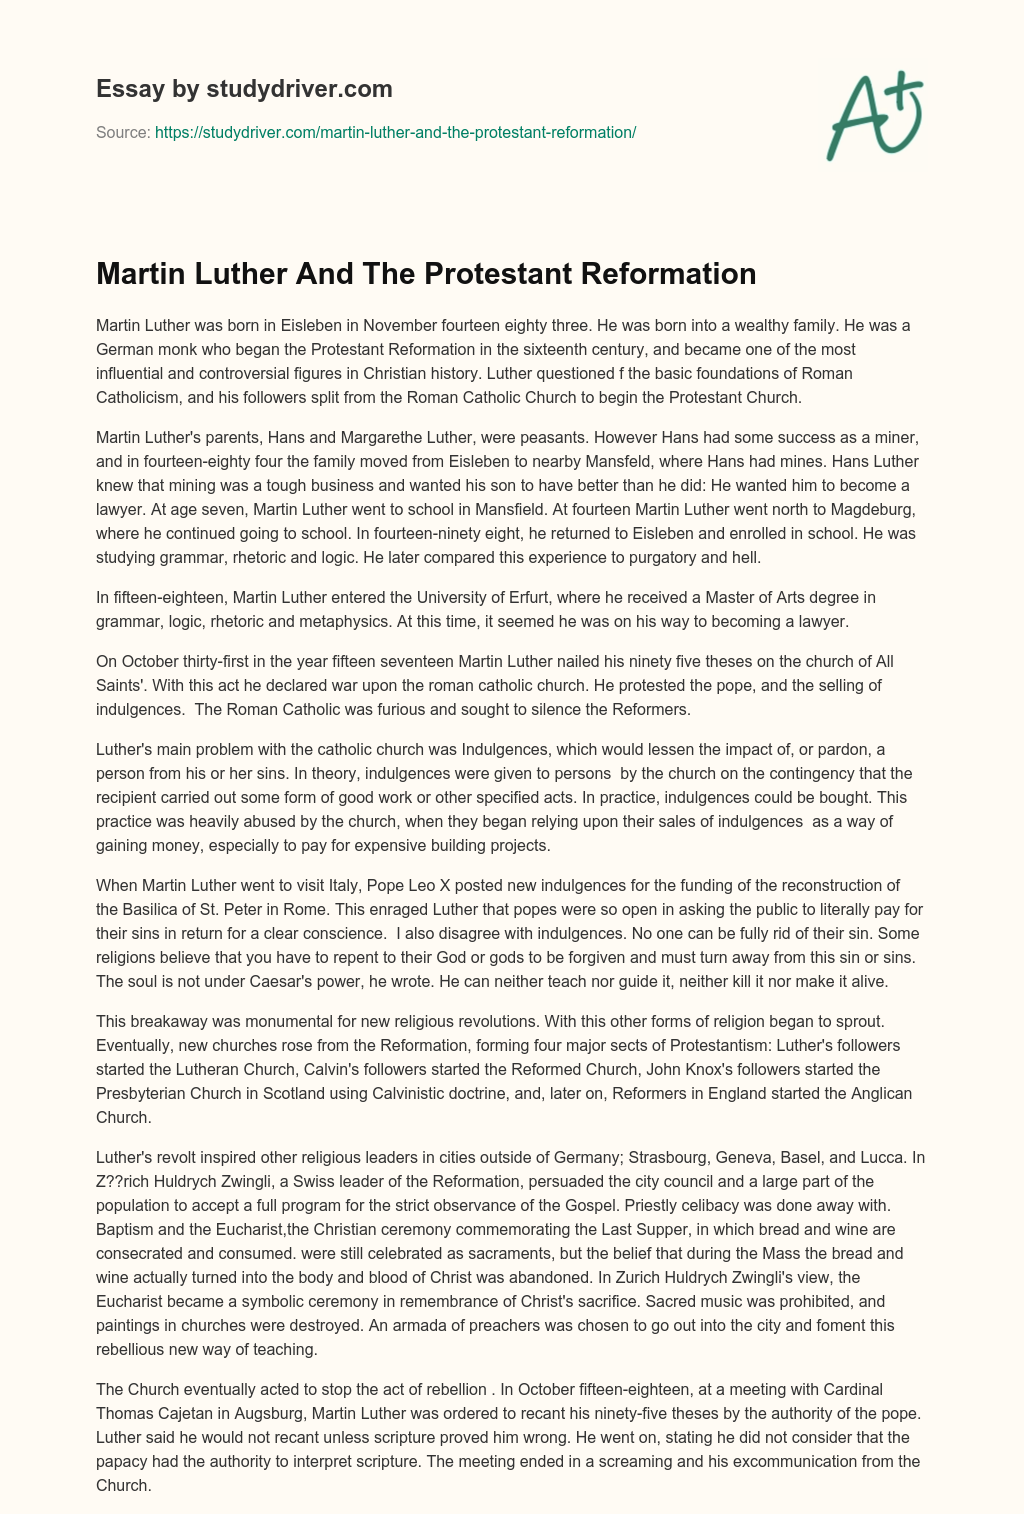 Martin Luther and the Protestant Reformation essay